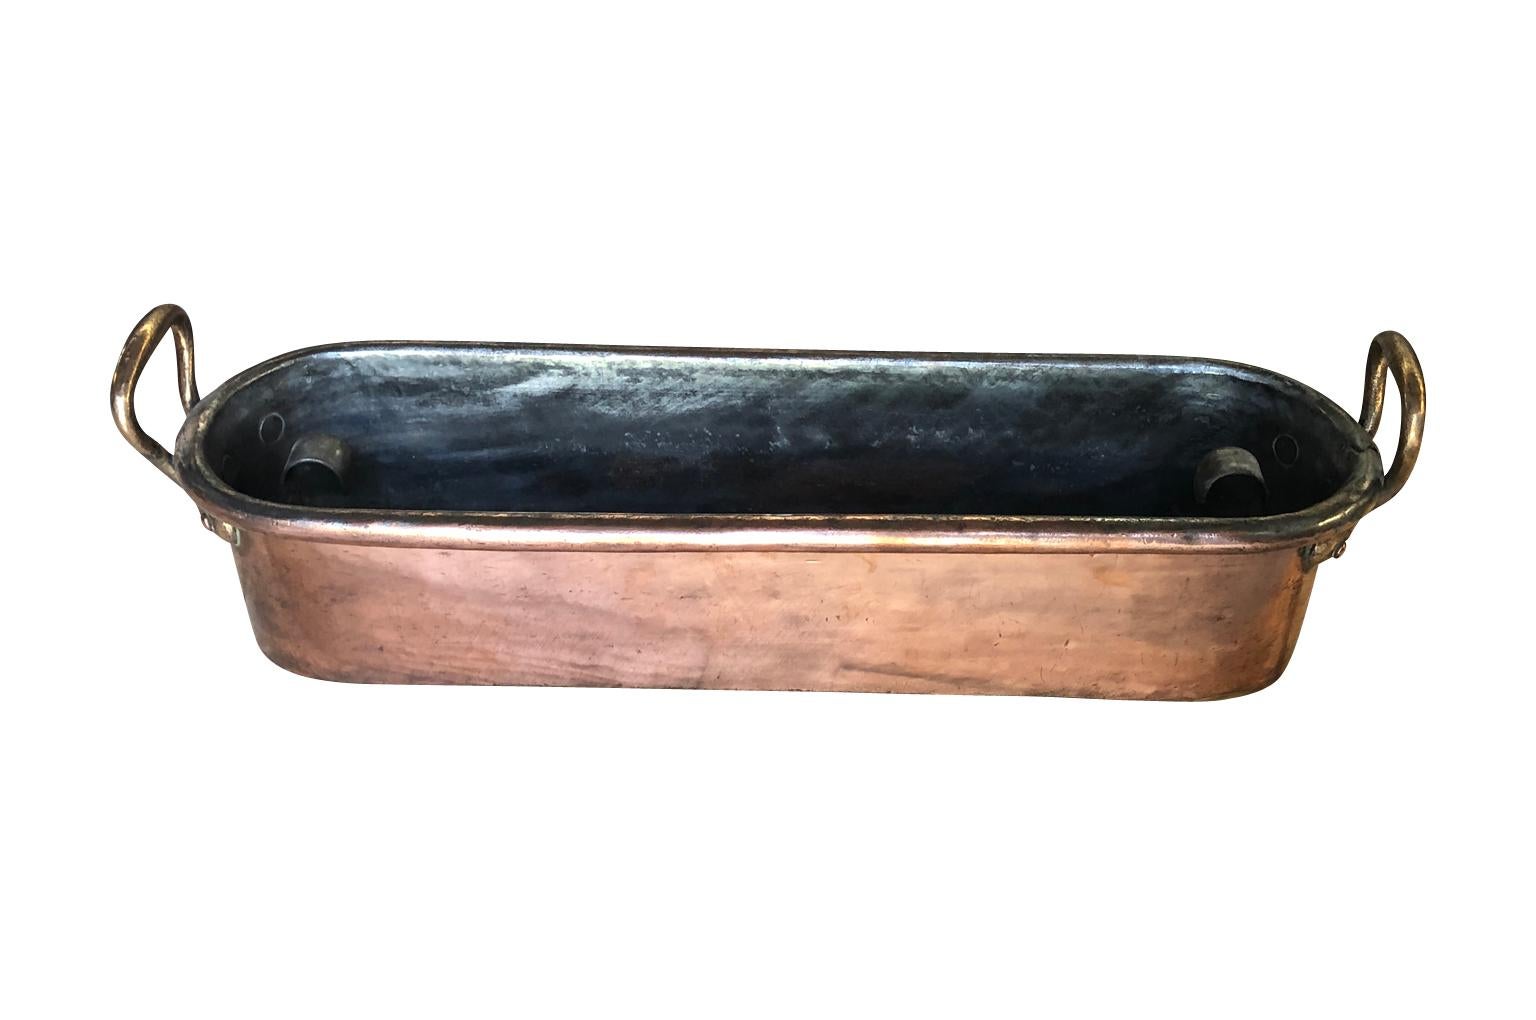 A mid-19th century fish pan in copper from the South of France. The pan retains its original poaching tray. Wonderful quality. A great addition to a copperware collection.